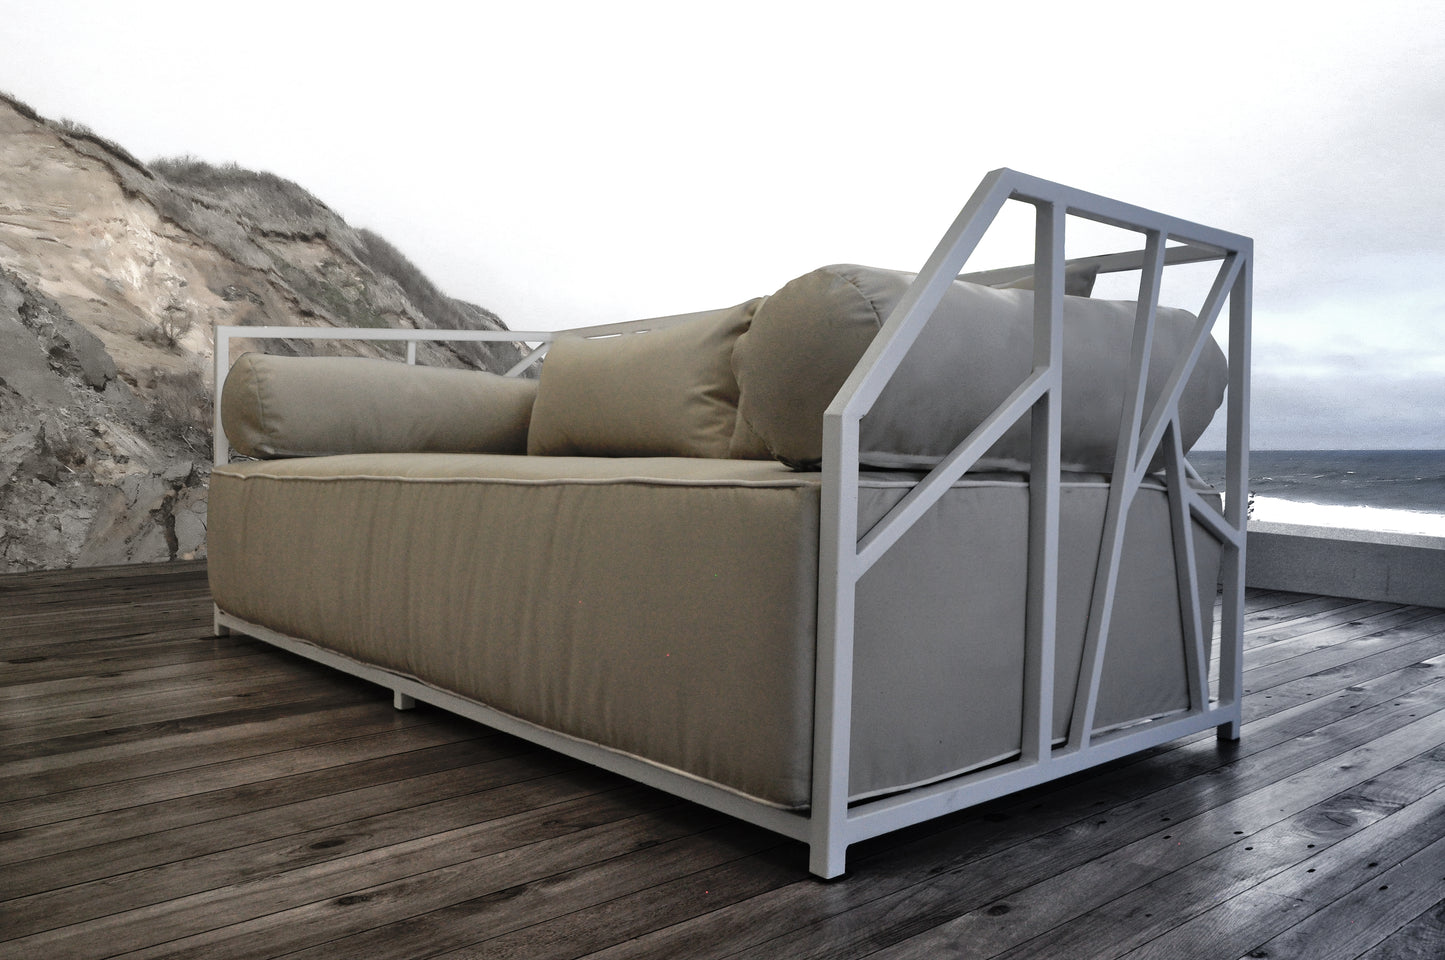 Nidum White Daybed with Beige Cushions